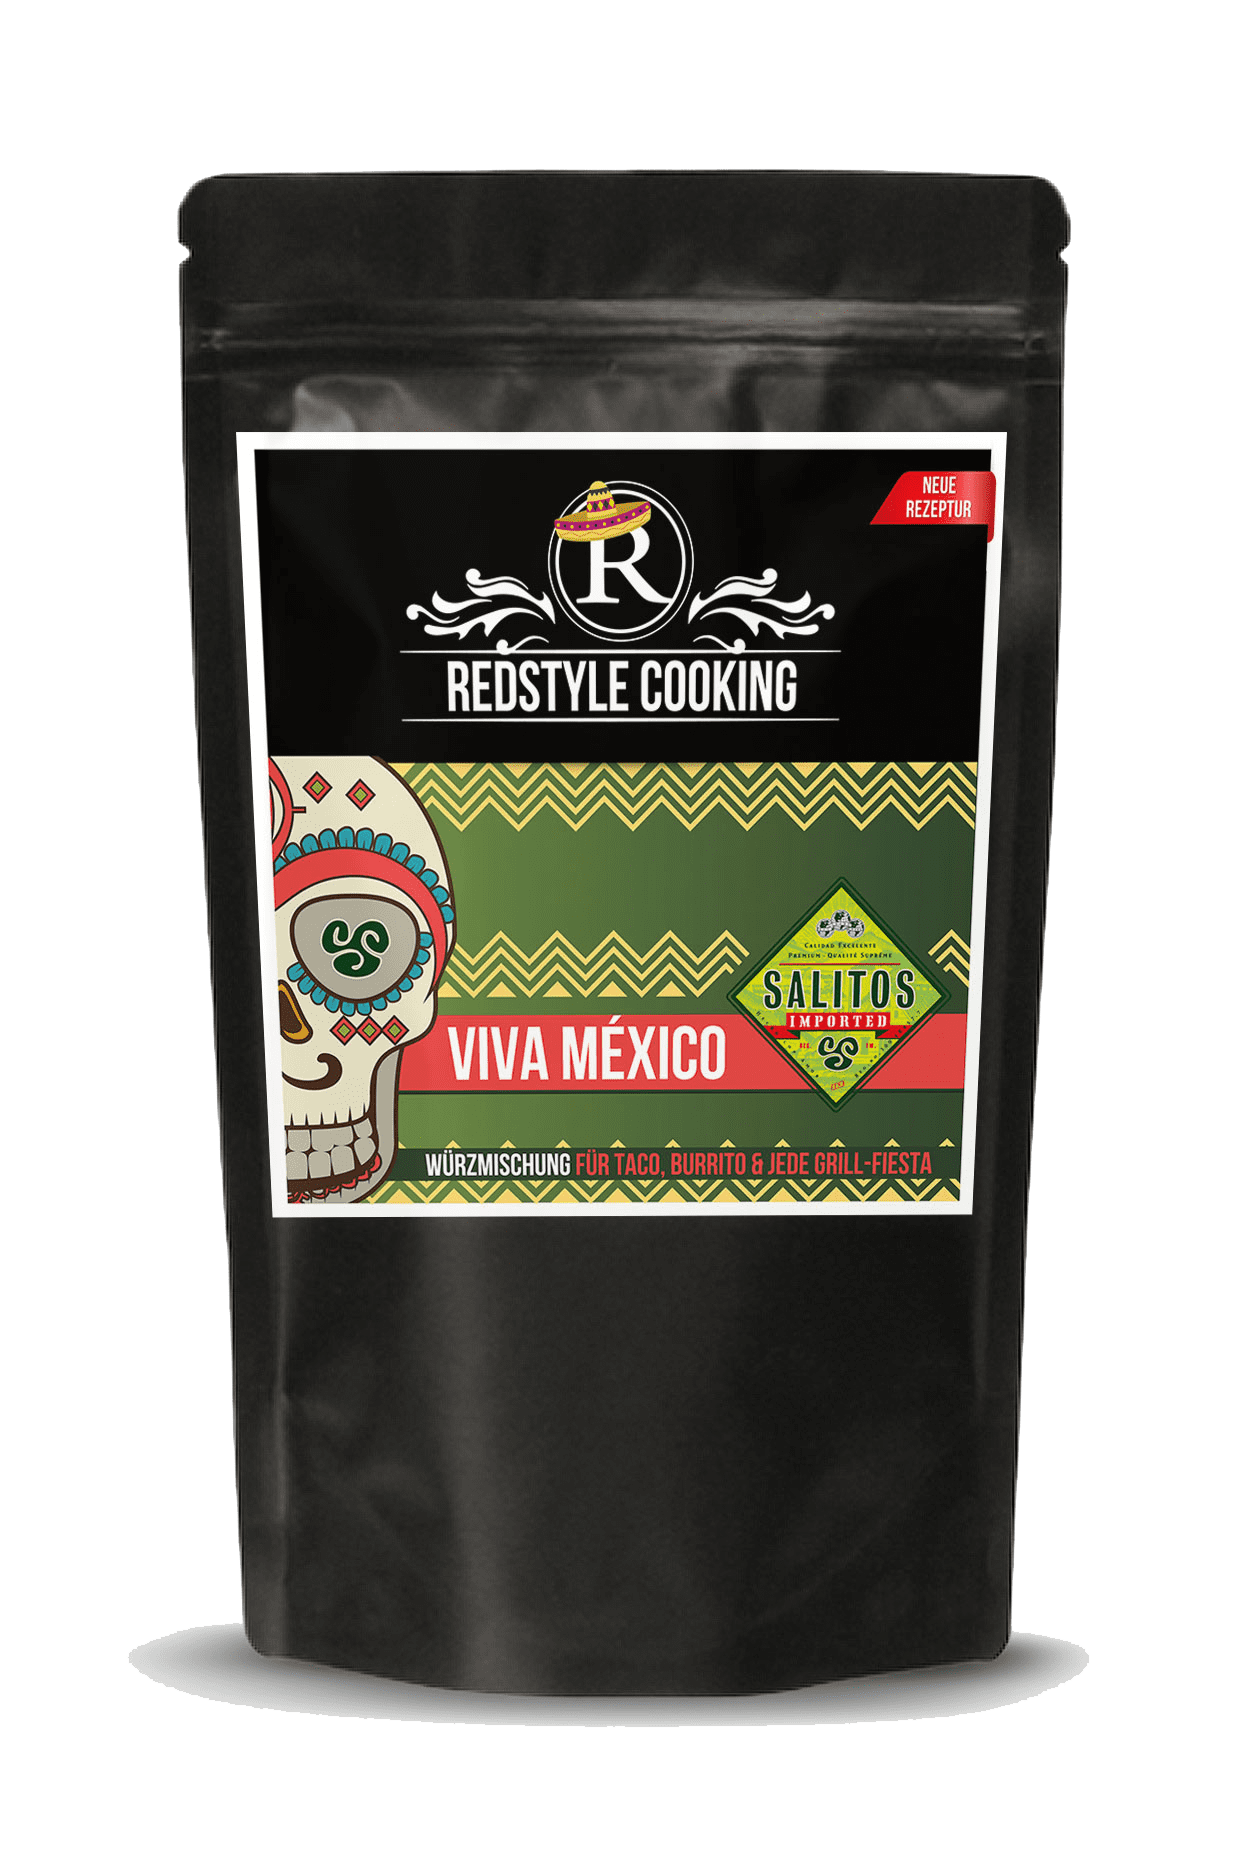 Viva Mexico, Redstyle Cooking